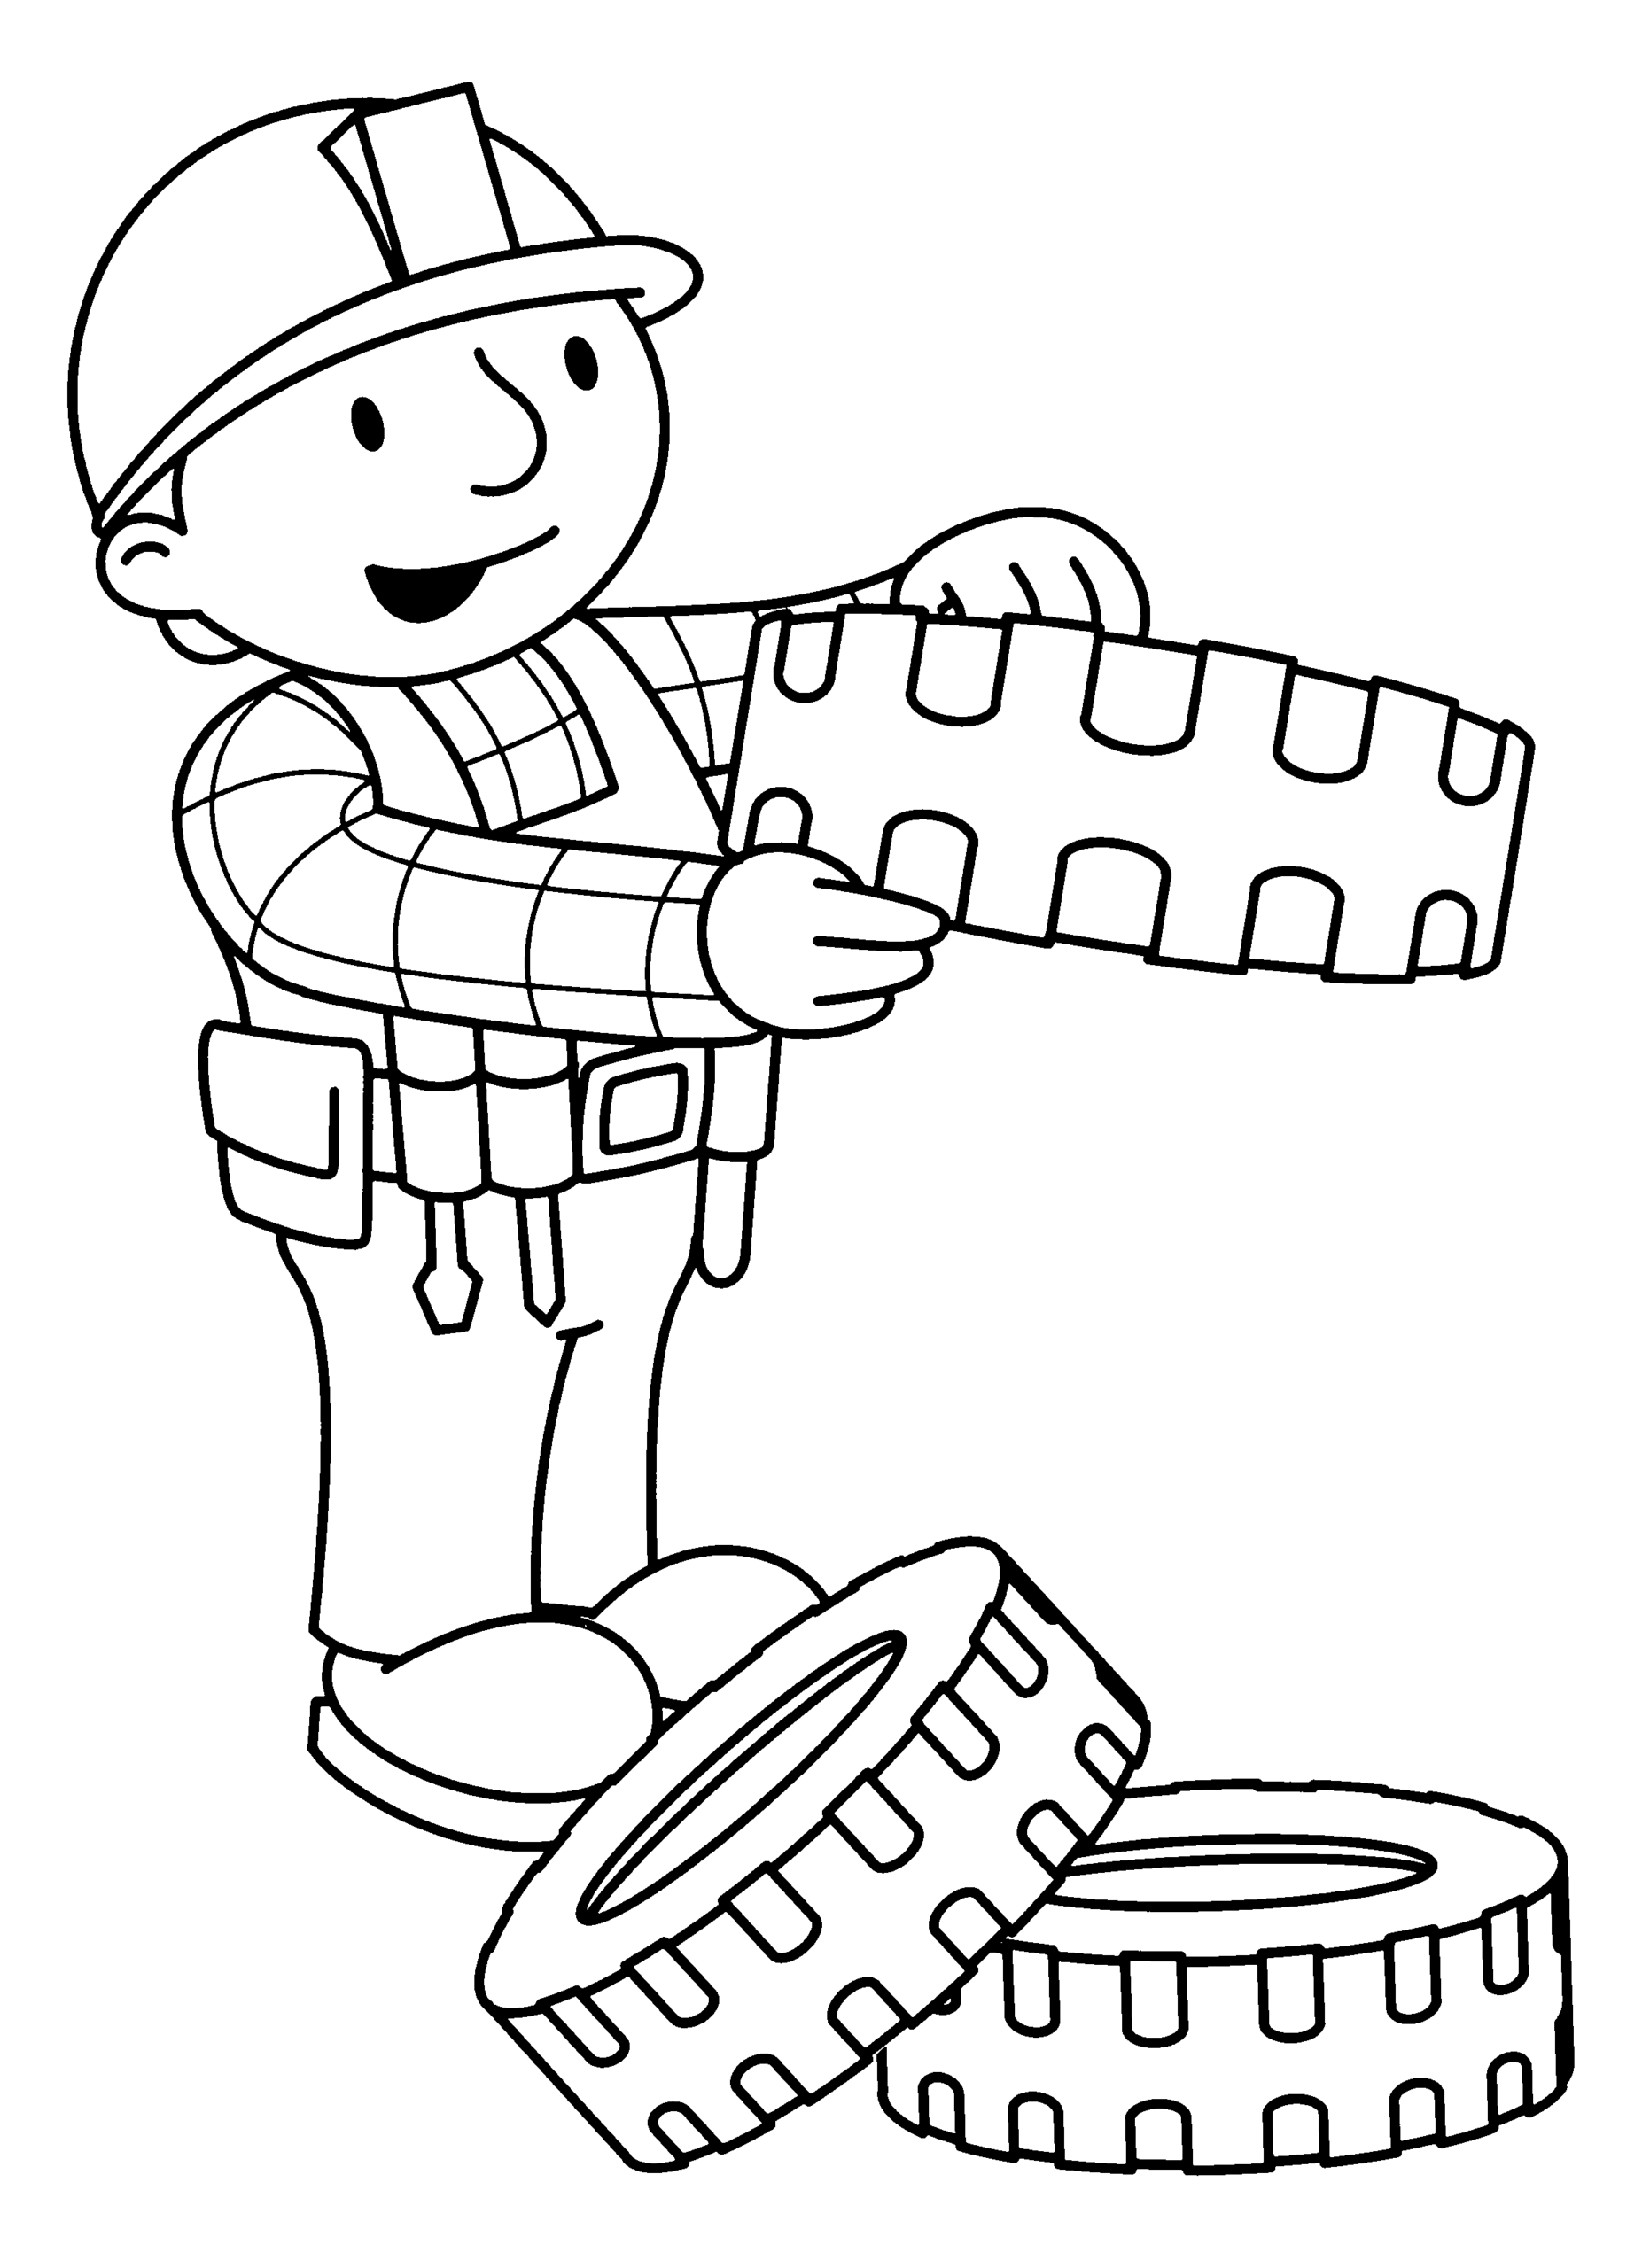 Bob the Builder Coloring Pages TV Film bob the builder 63 Printable 2020 01085 Coloring4free